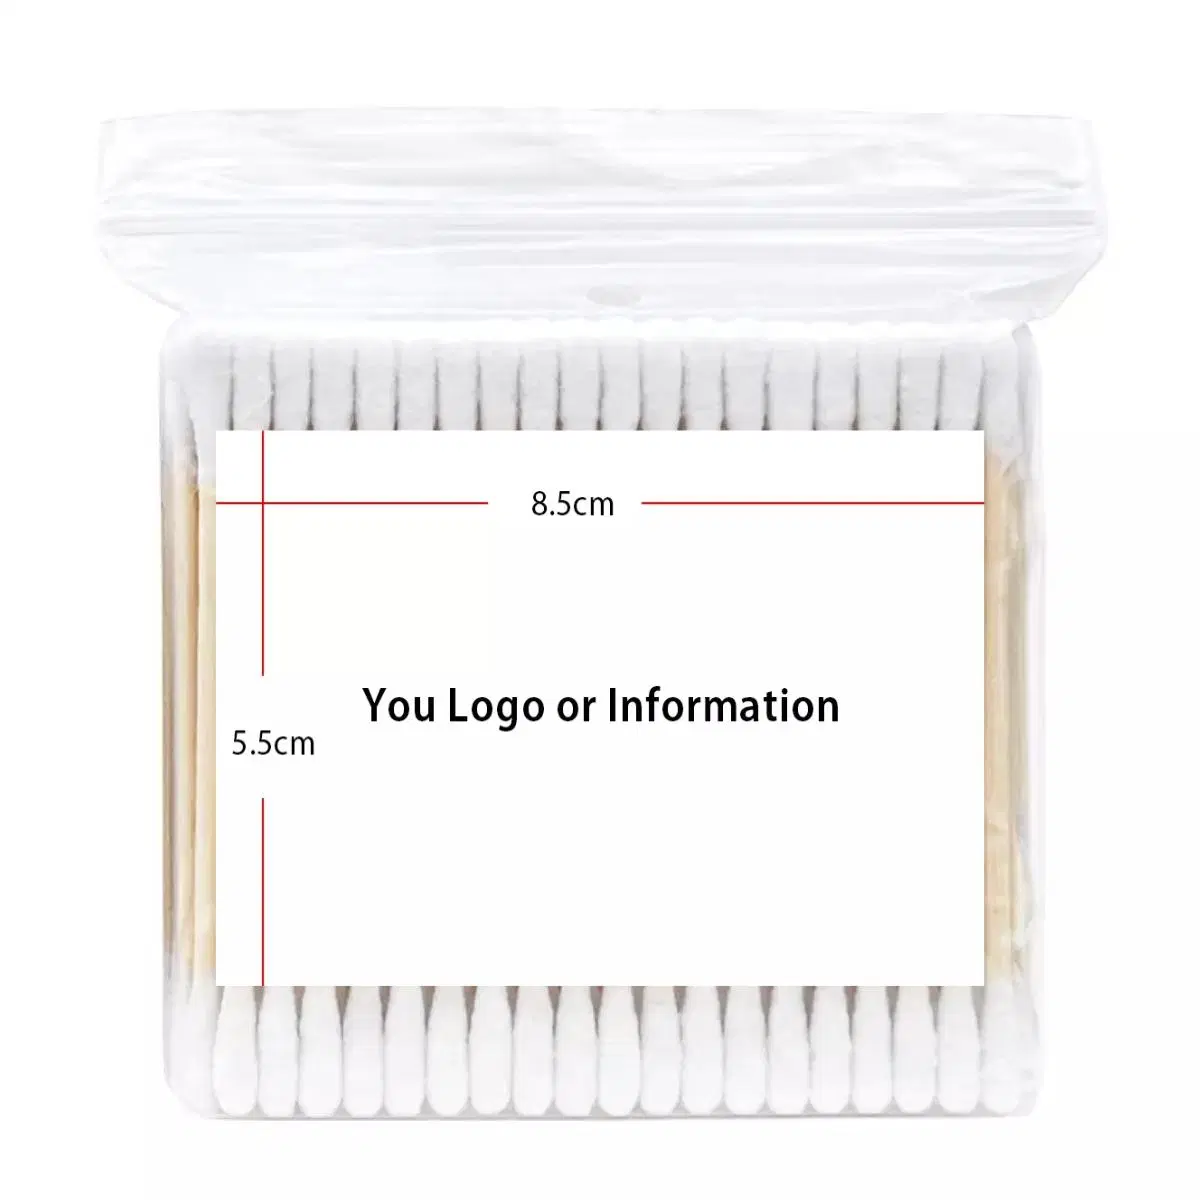 100 PCS High quality/High cost performance Medical Paper Wooden Bamboo Stick Double Head Cotton Swab for Daily Use